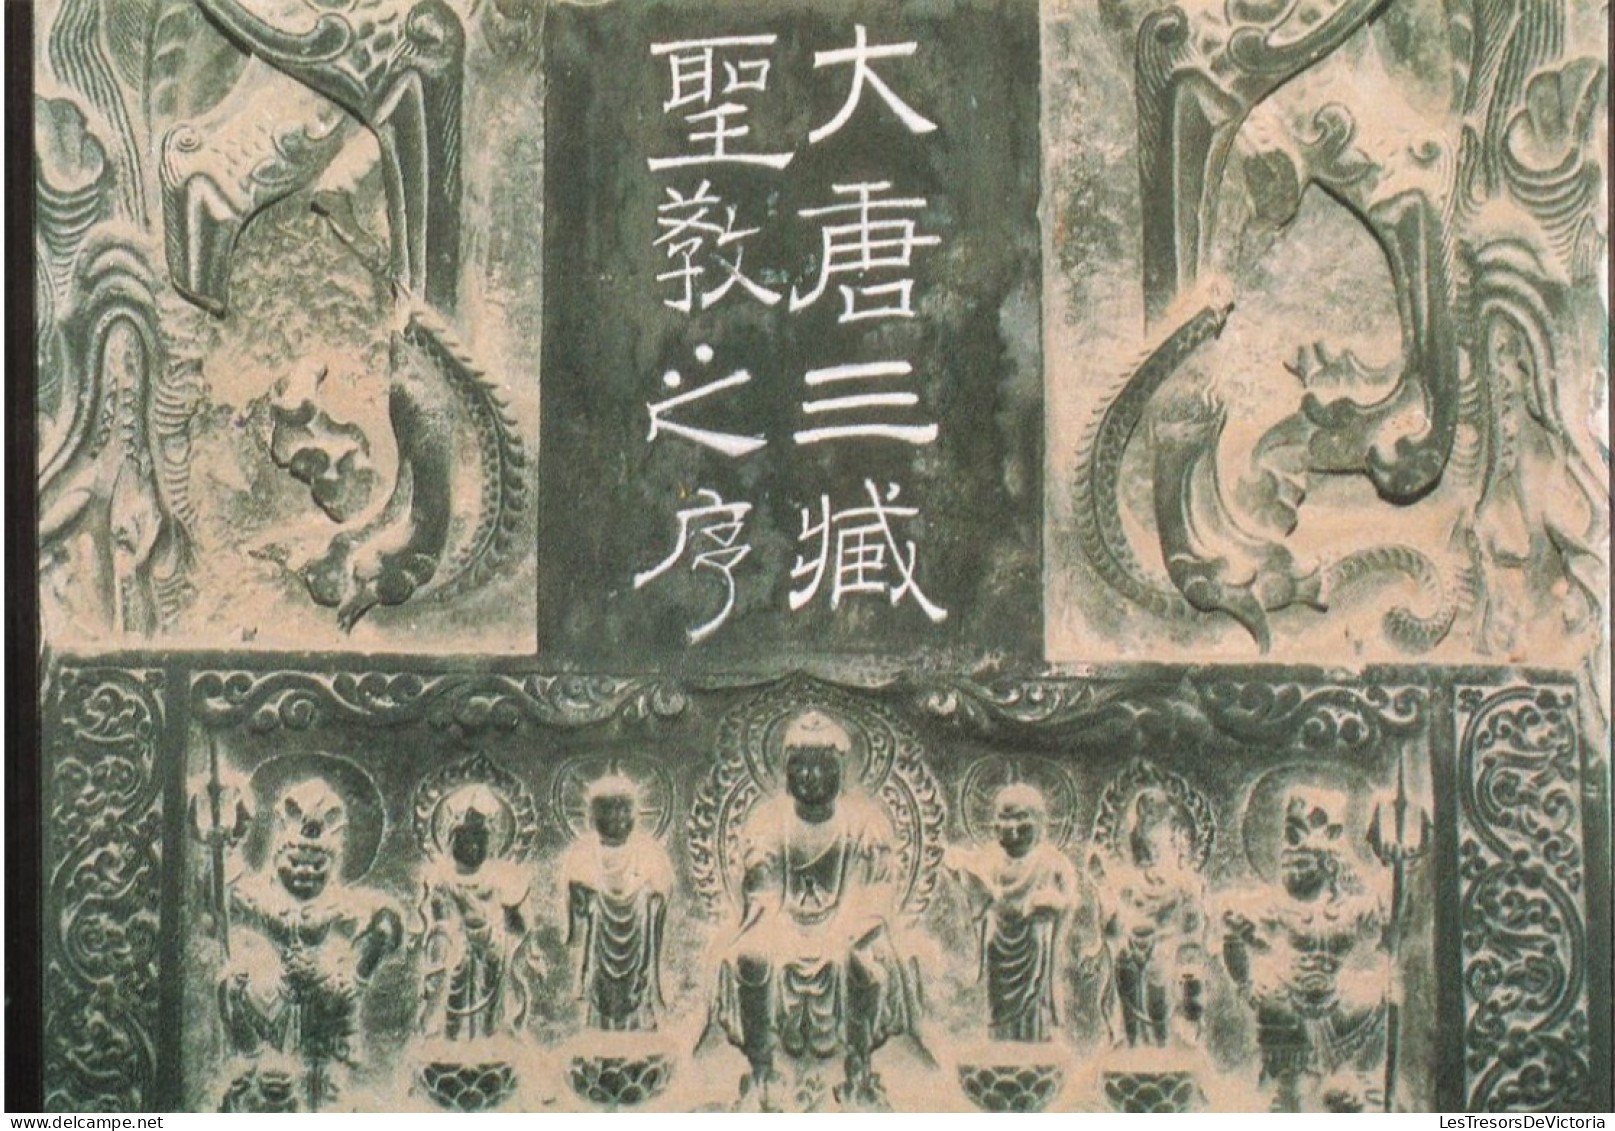 CHINE - Embossment On The Top Of The Tablet Of The Preface To The Holy Religion Written By Emperor - Carte Postale - China